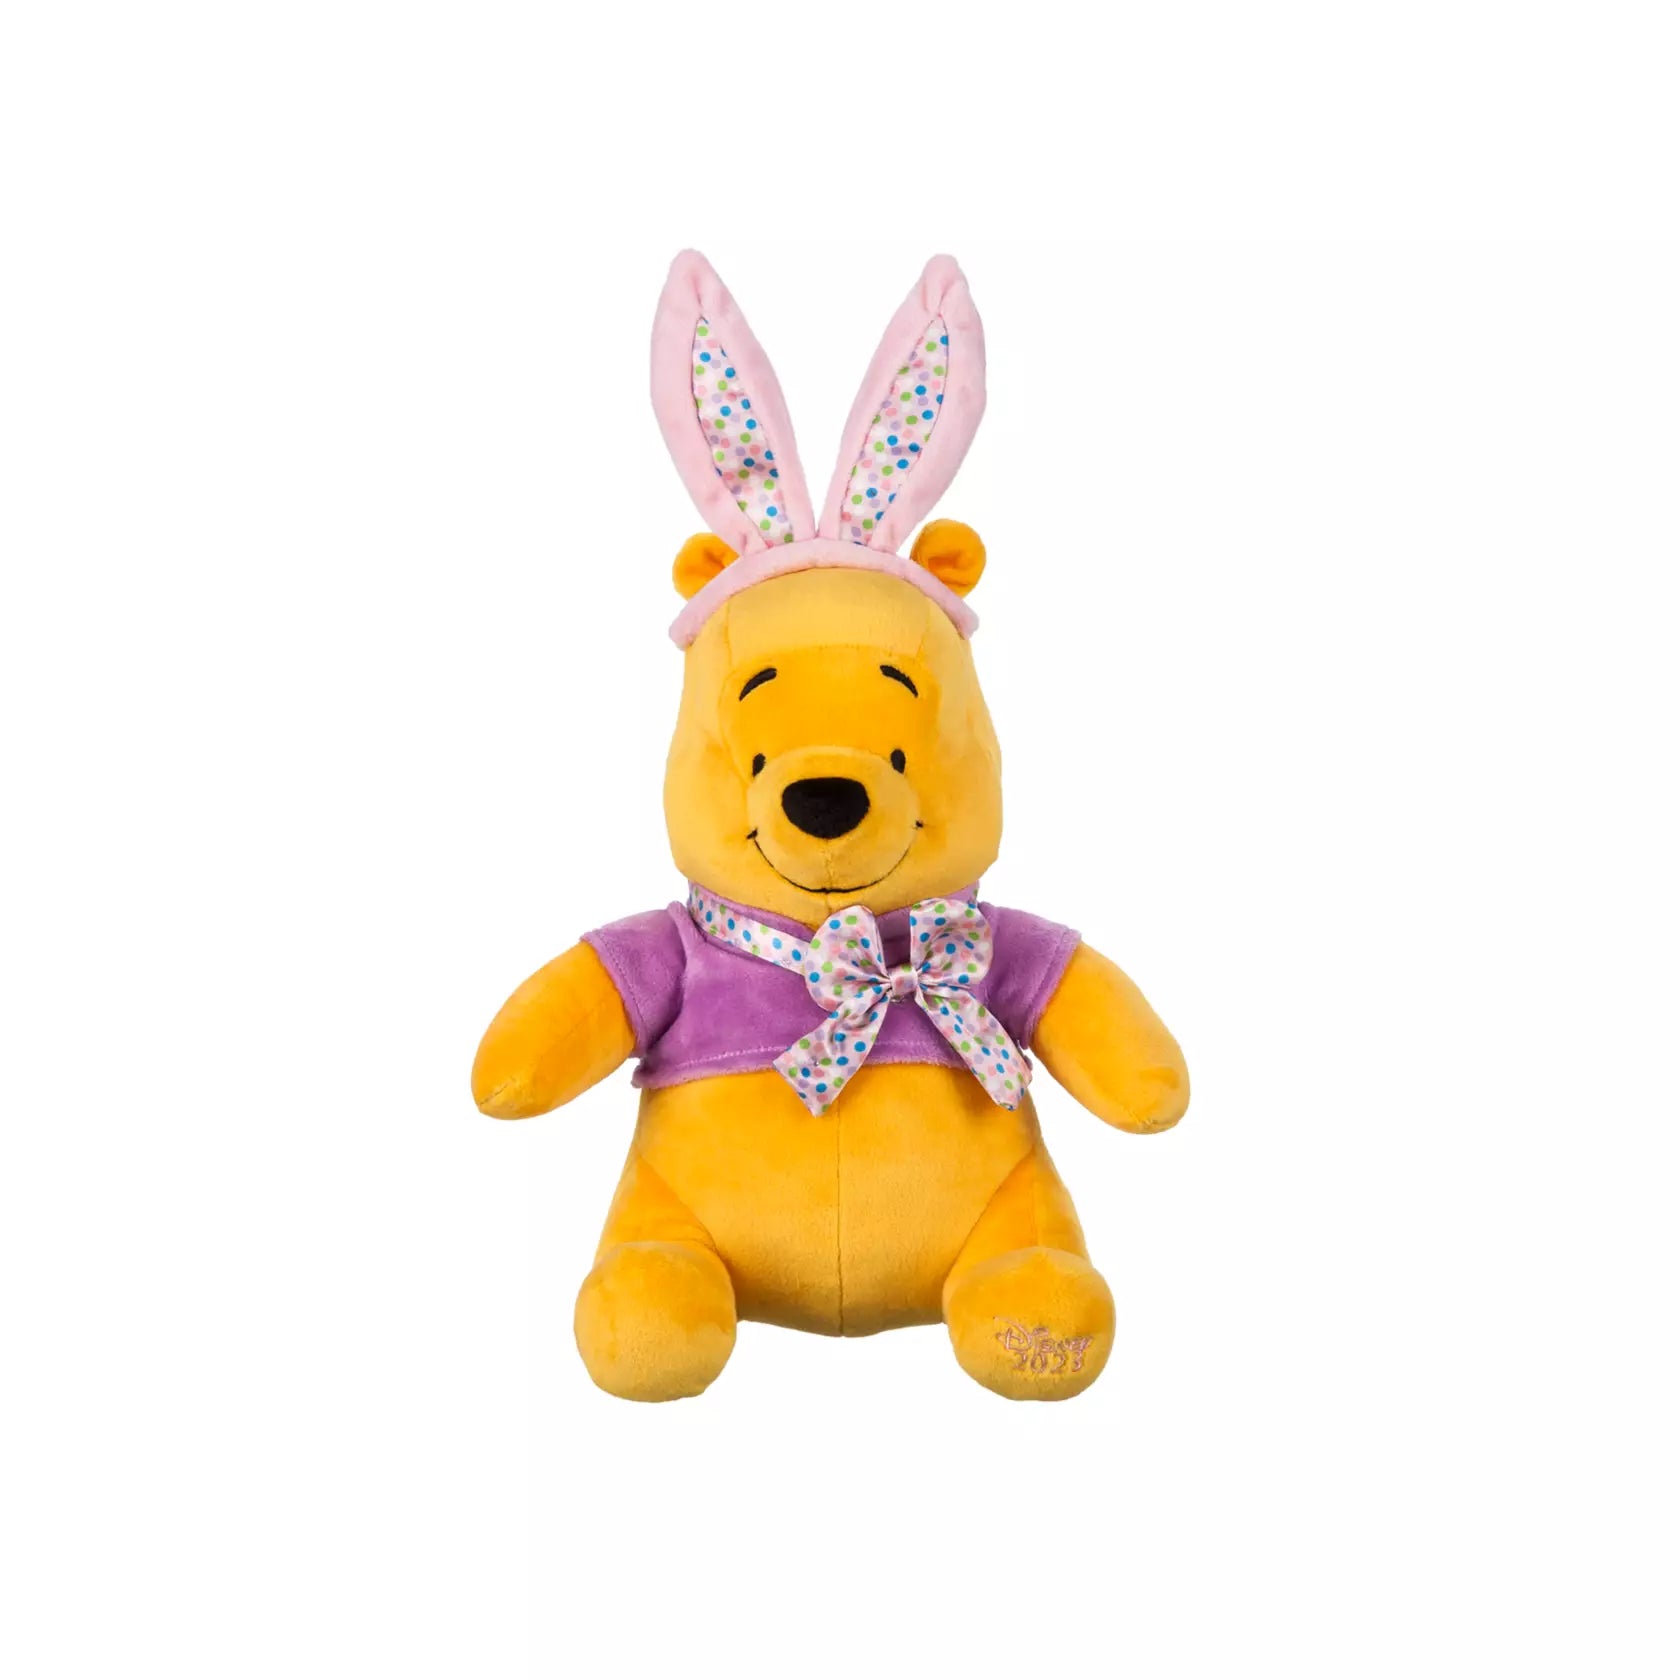 Disney Winnie the Pooh Plush Easter Bunny – Small 10 - BumbleToys - 2-4 Years, 4+ Years, 5-7 Years, Characters, Disney, Girls, OXE, Pre-Order